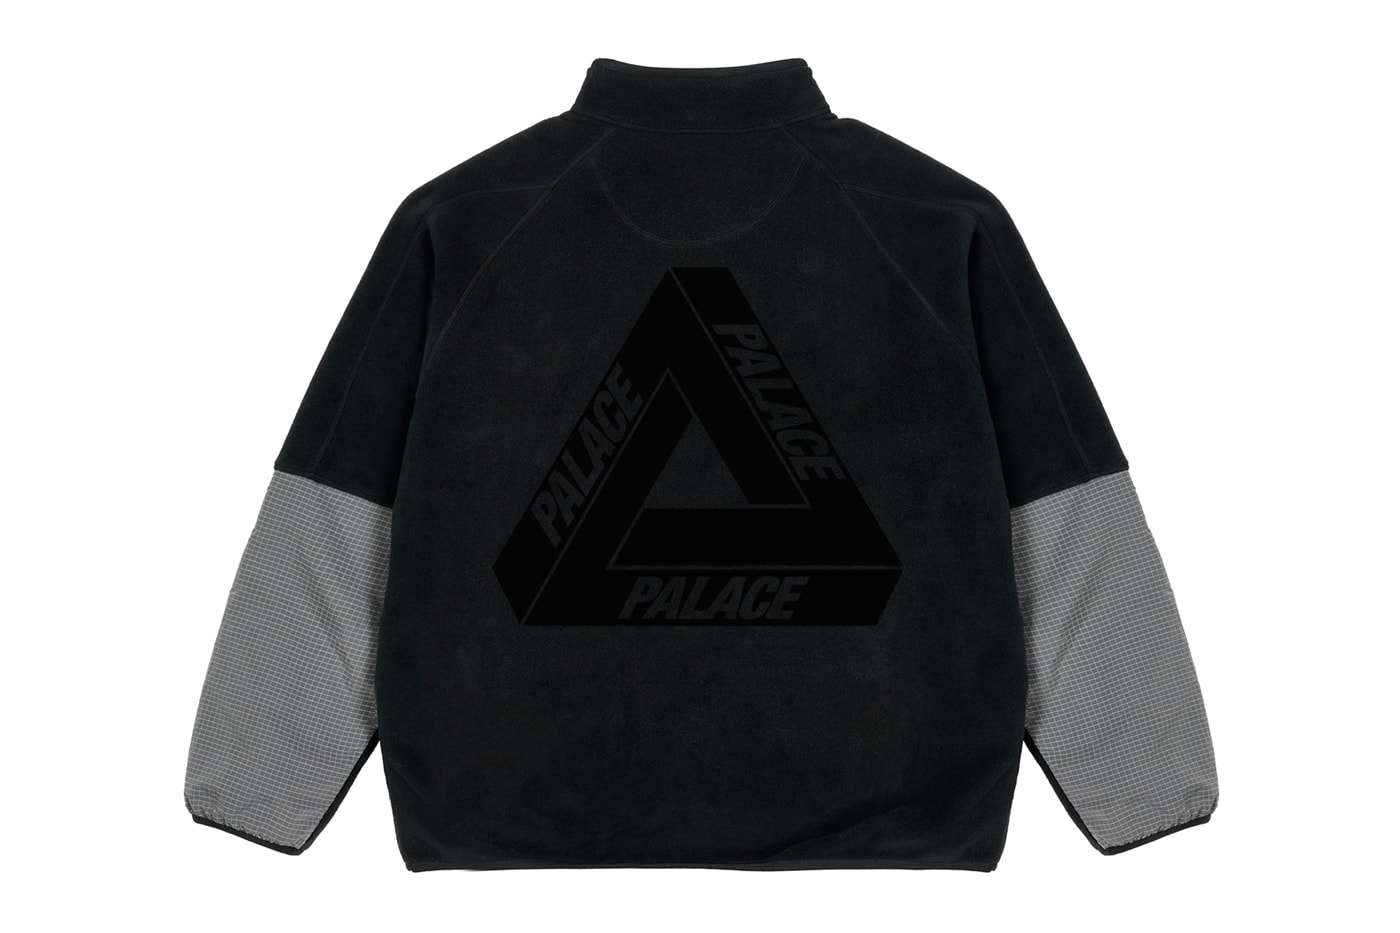 Palace Fall 2022 Collection Week 8 Drop List Release Info Date Buy Price 